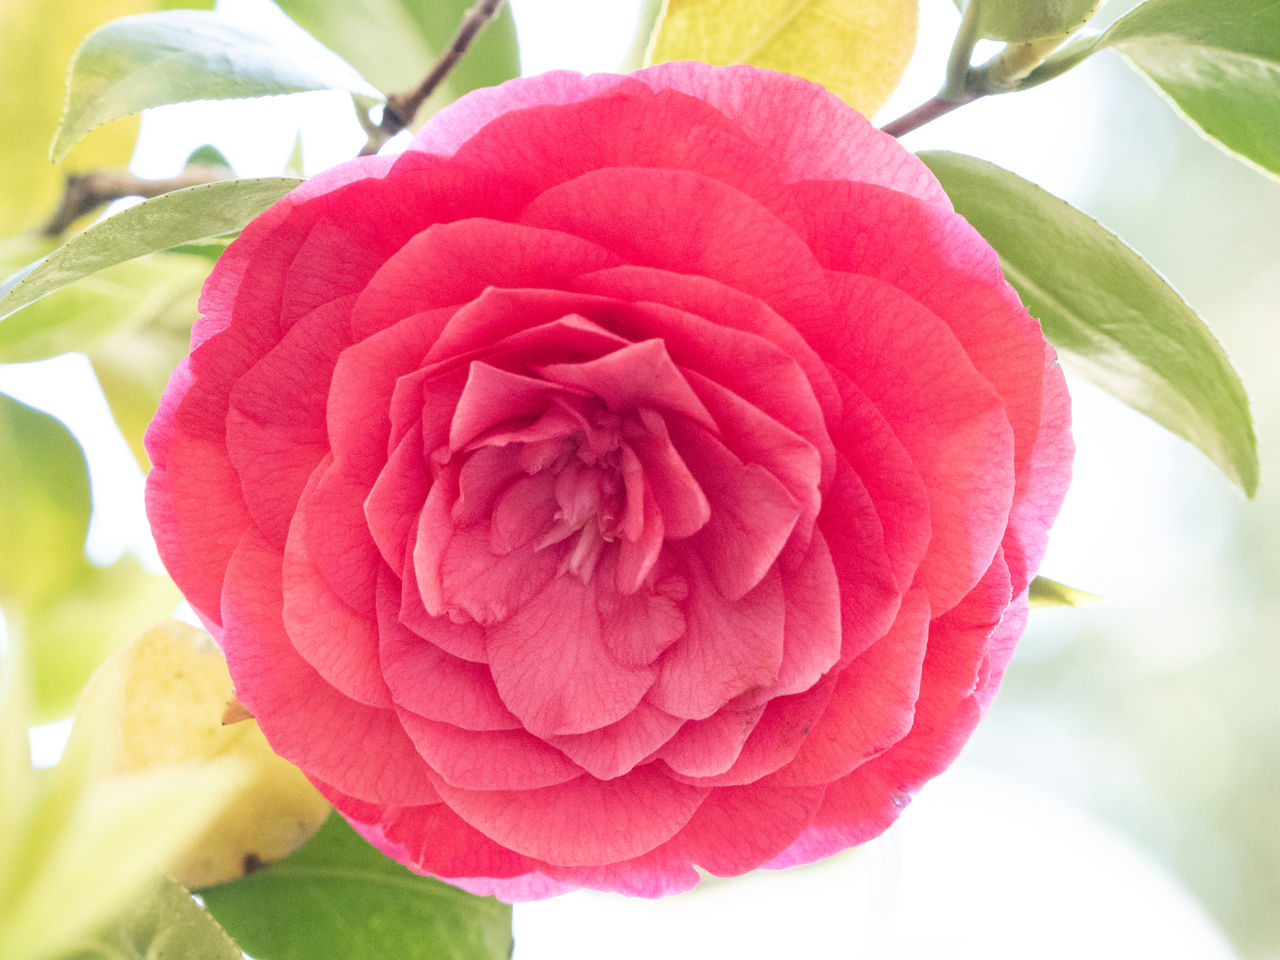 plant, flower, flowering plant, beauty in nature, freshness, leaf, petal, close-up, plant part, pink, nature, japanese camellia, flower head, fragility, inflorescence, theaceae, rose, no people, growth, red, outdoors, springtime, garden roses, vibrant color, day